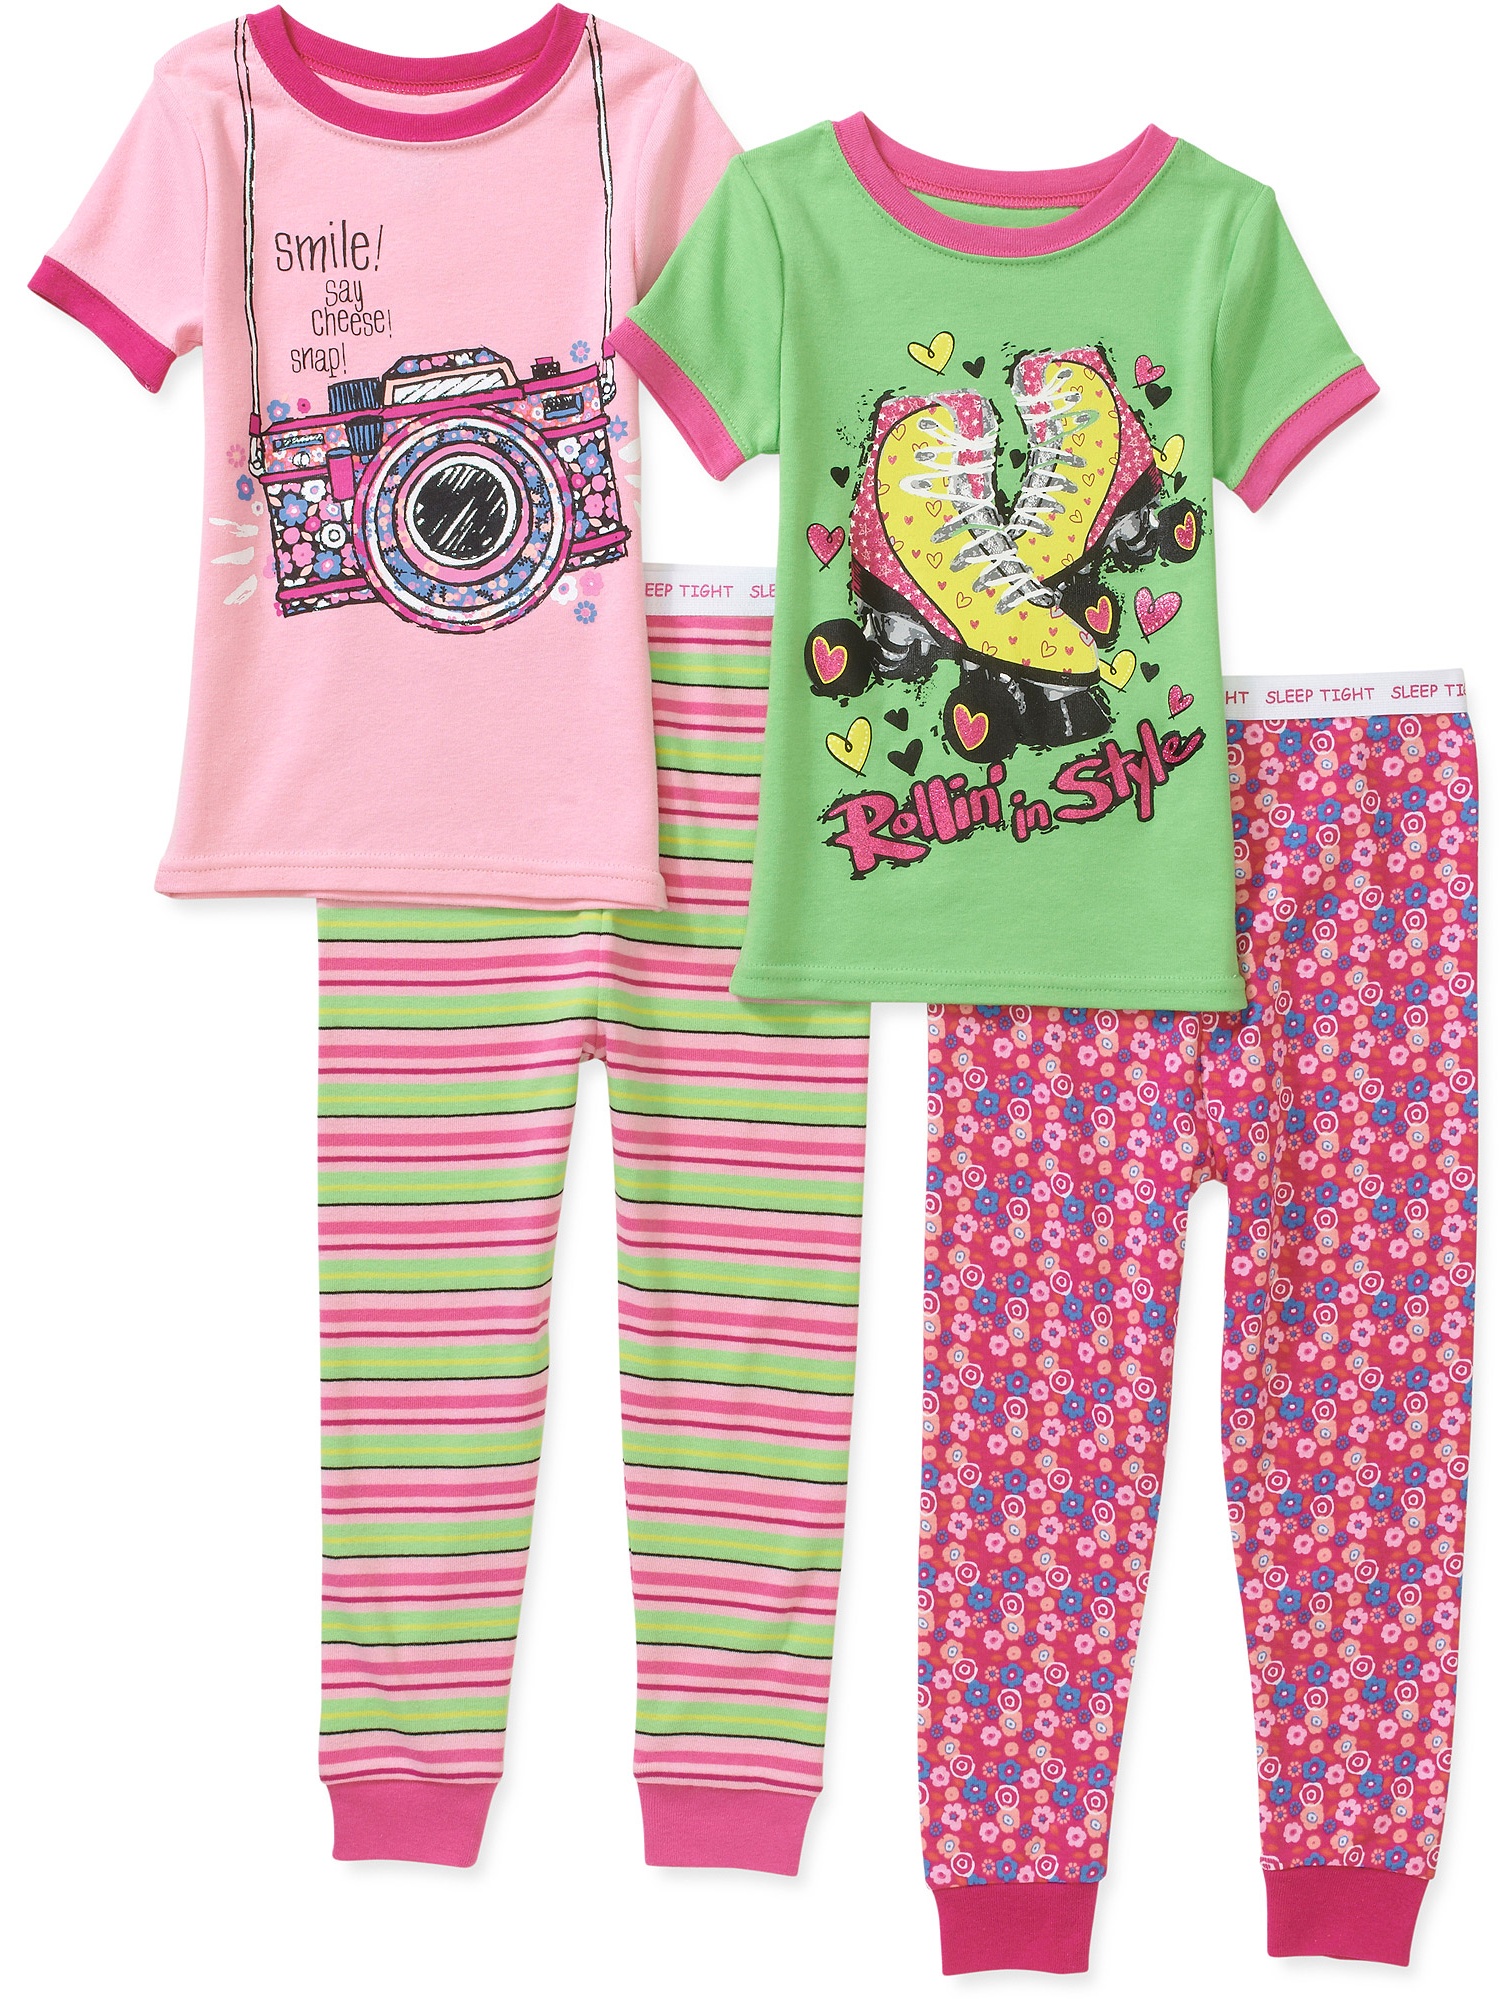 Faded Glory Baby Girls' 4 Piece Tight Fi - image 1 of 1